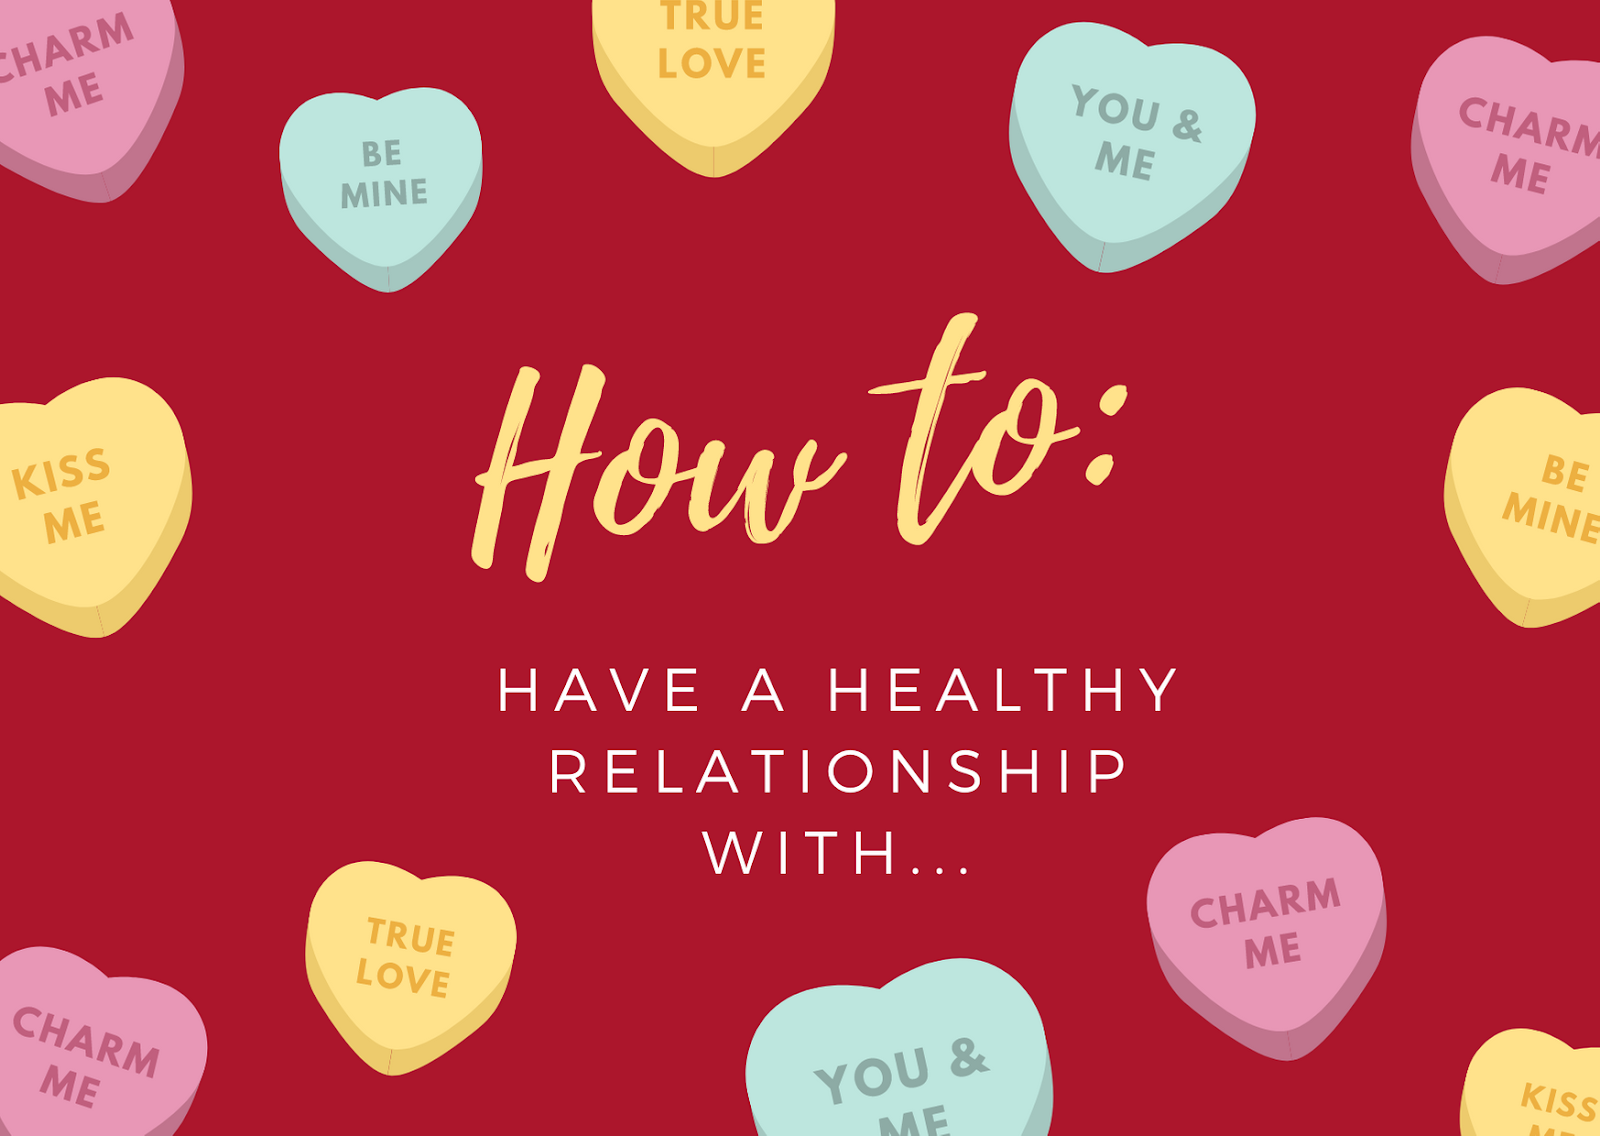 How To: Have Healthy Relationships With…